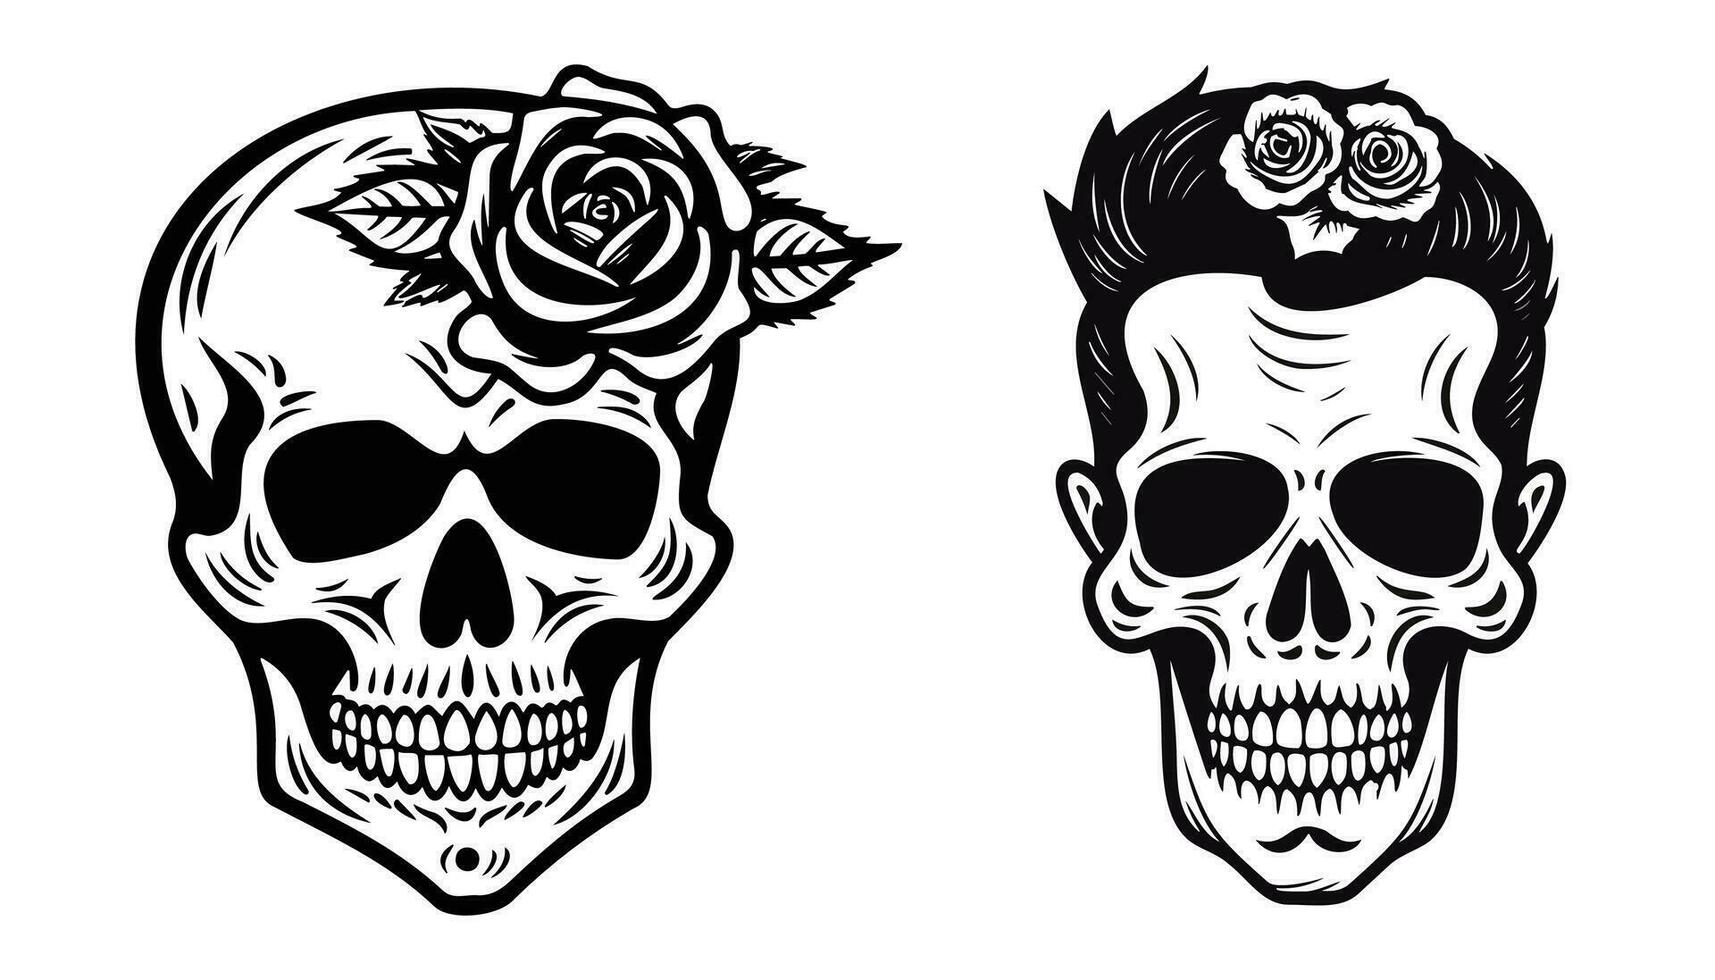 Black Skulls and roses vector illustration on Isolated white background, coloring pages for adults